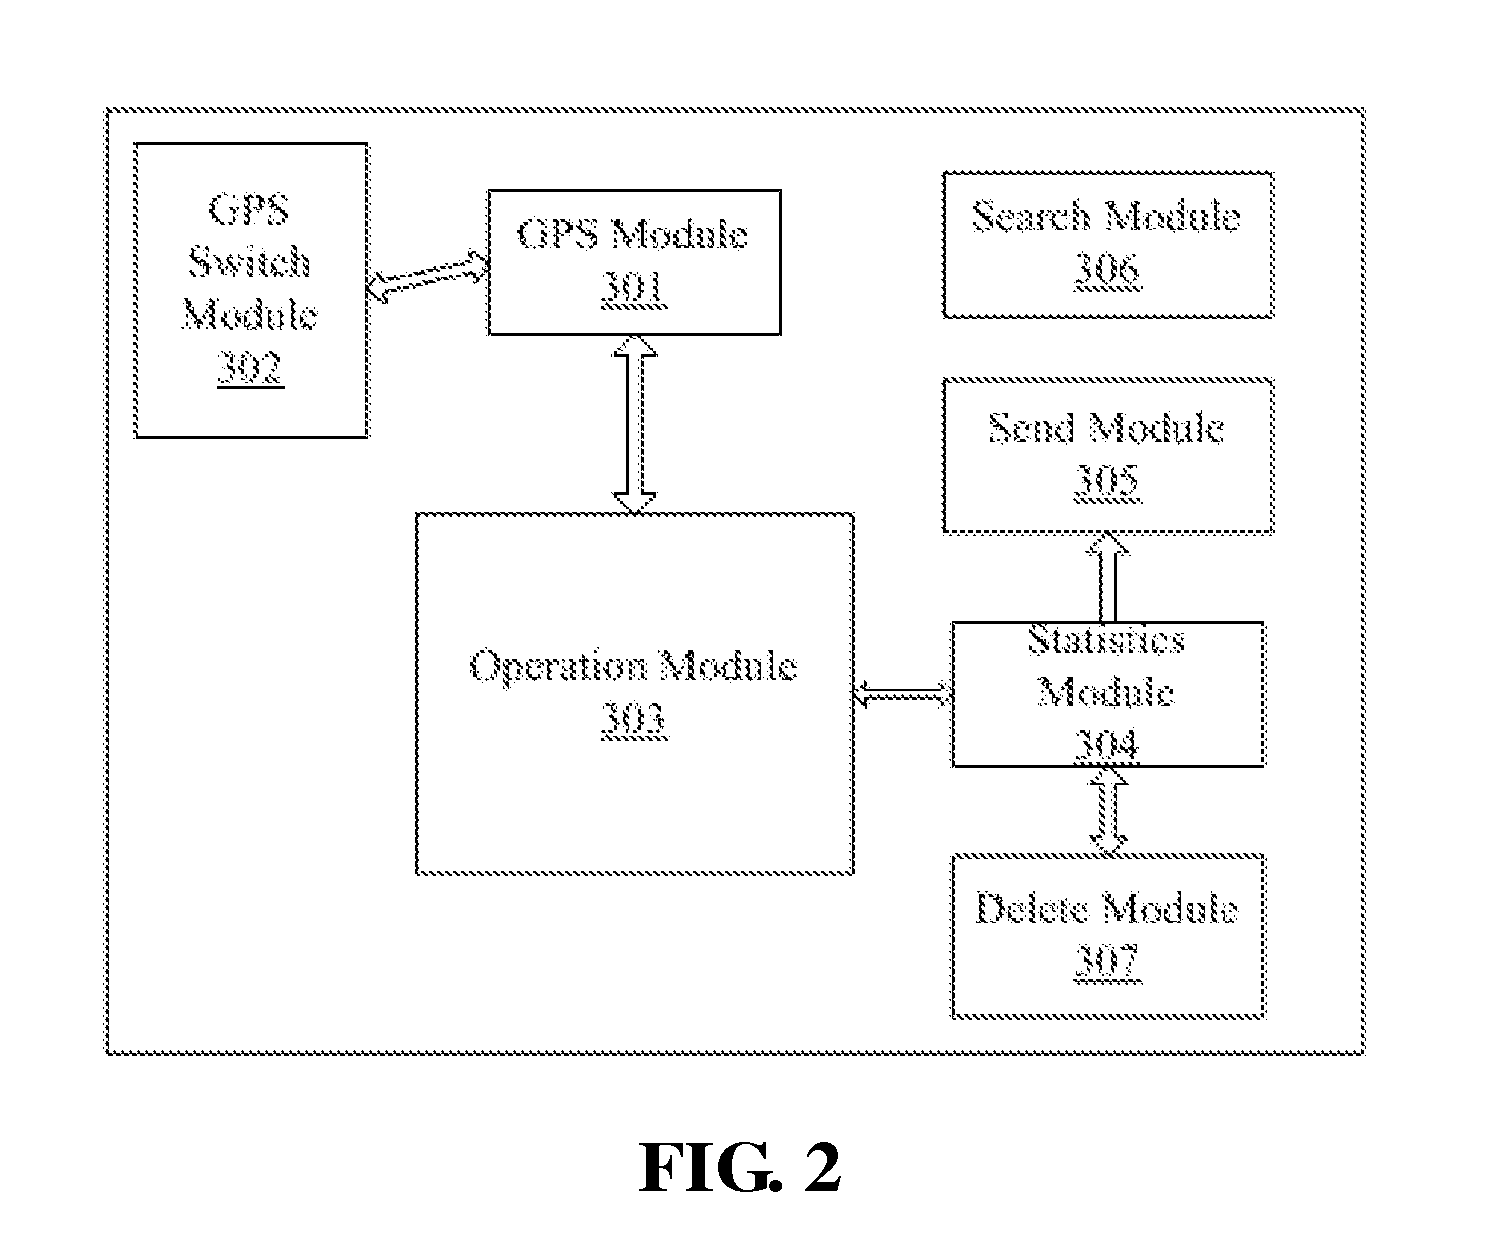 System and method for acquiring statistics of navigation information